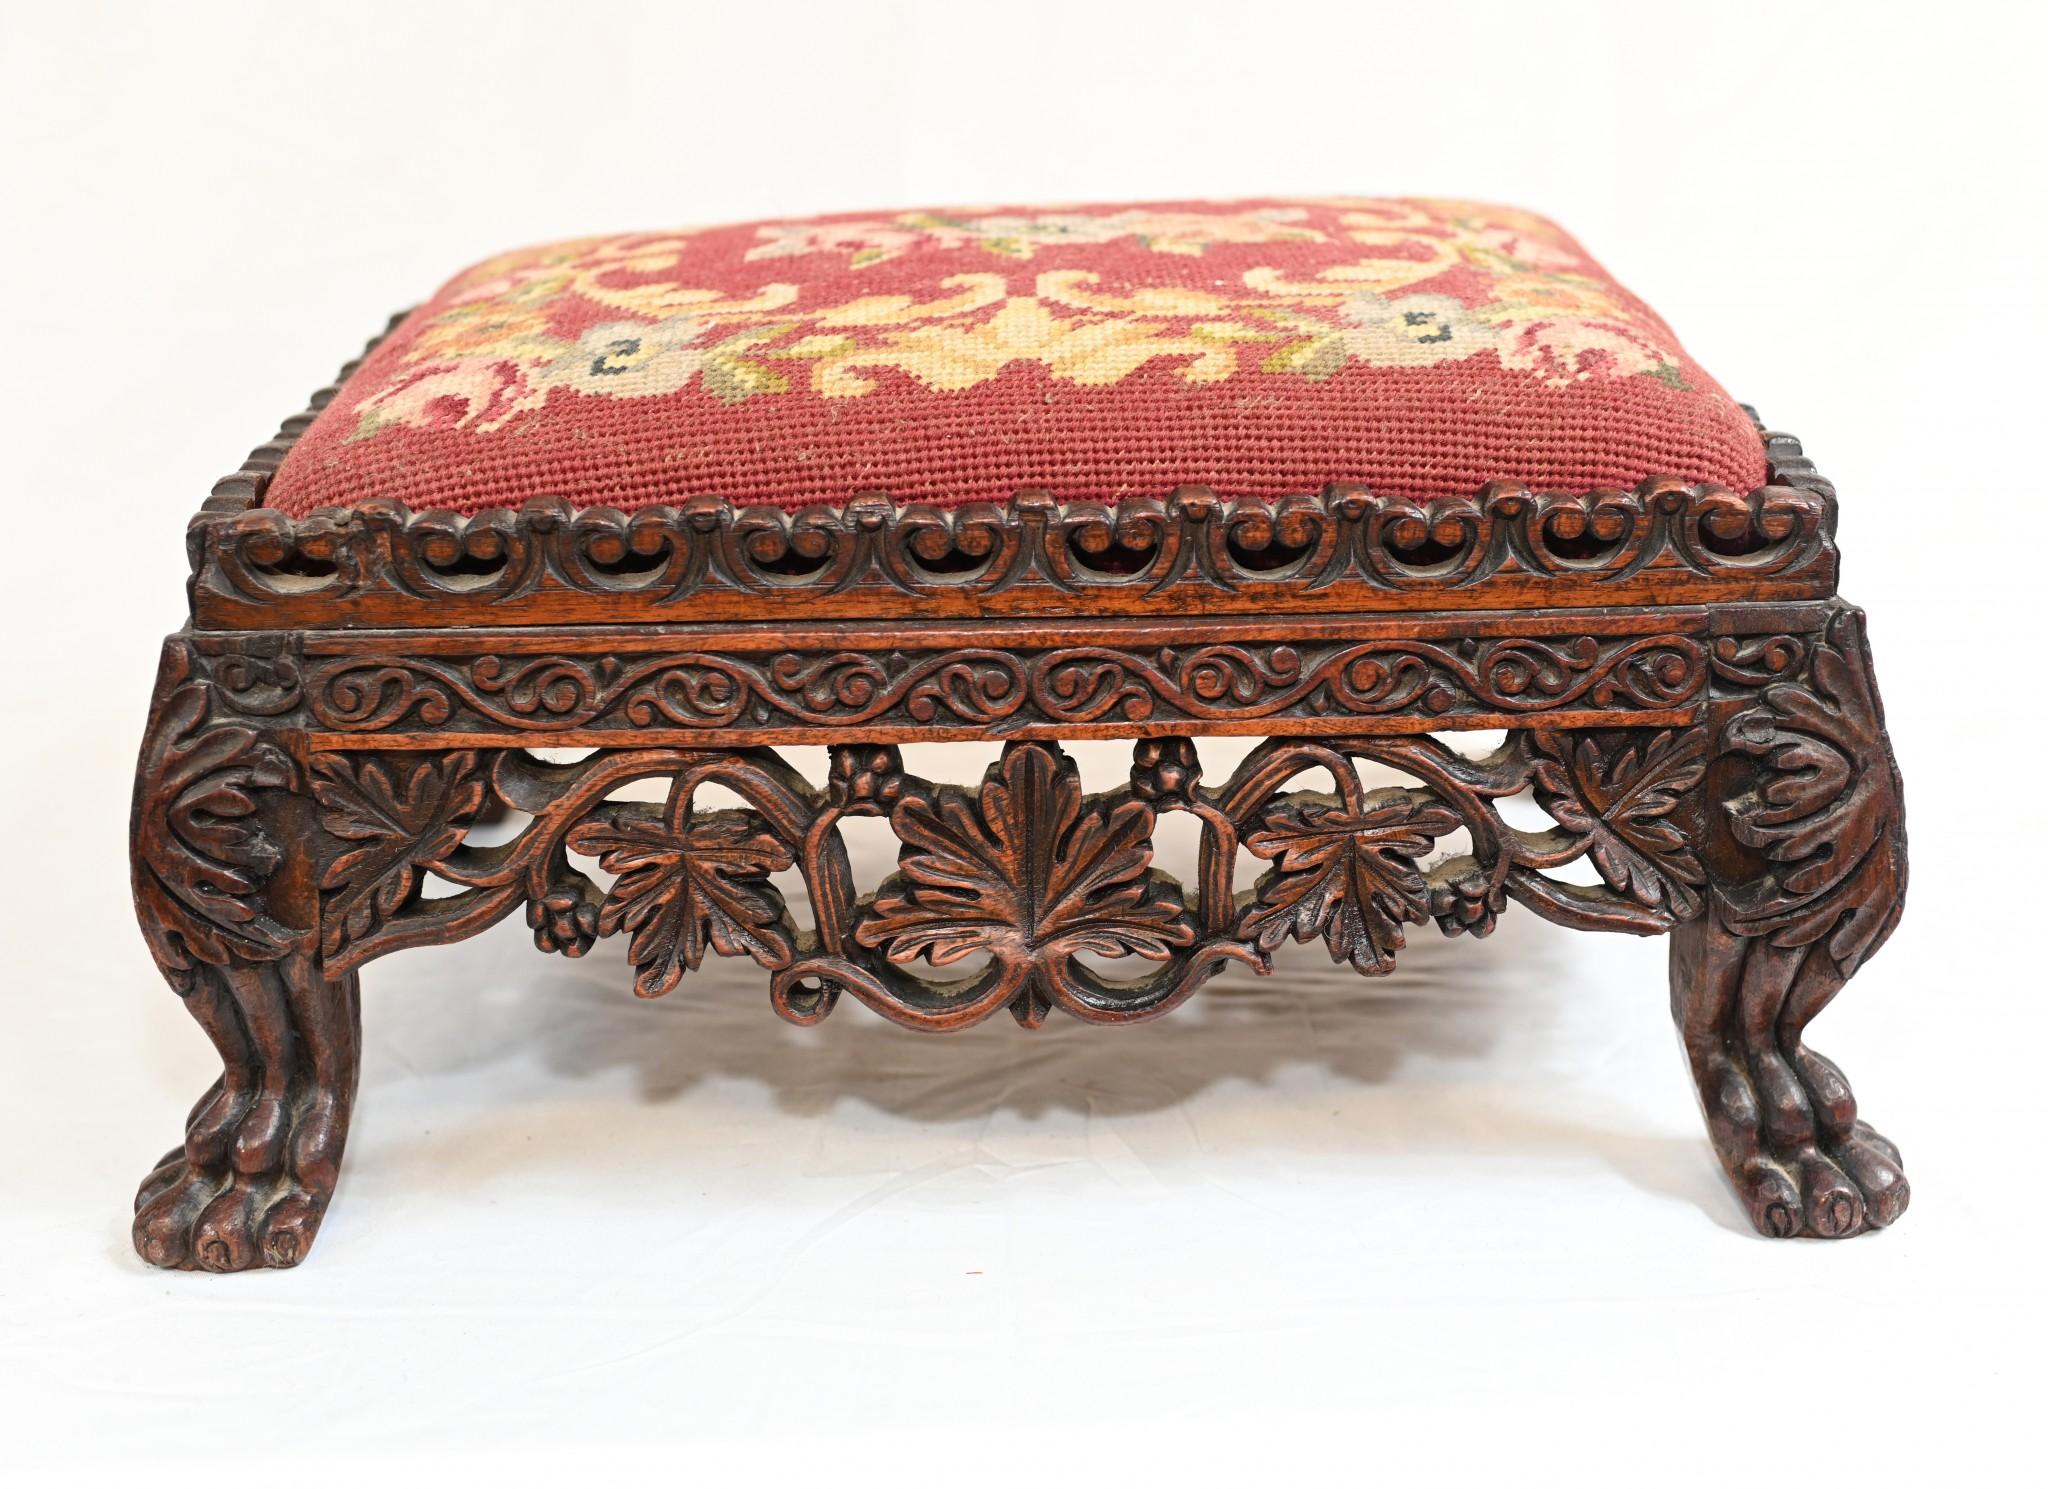 Gorgeous hand carved antique Burmese foot stool
Finished with intricate needlepoint tapestry top
Amazing details to the carving, circa 1880
Some of our items are in storage so please check ahead of a viewing to see if it is on our shop